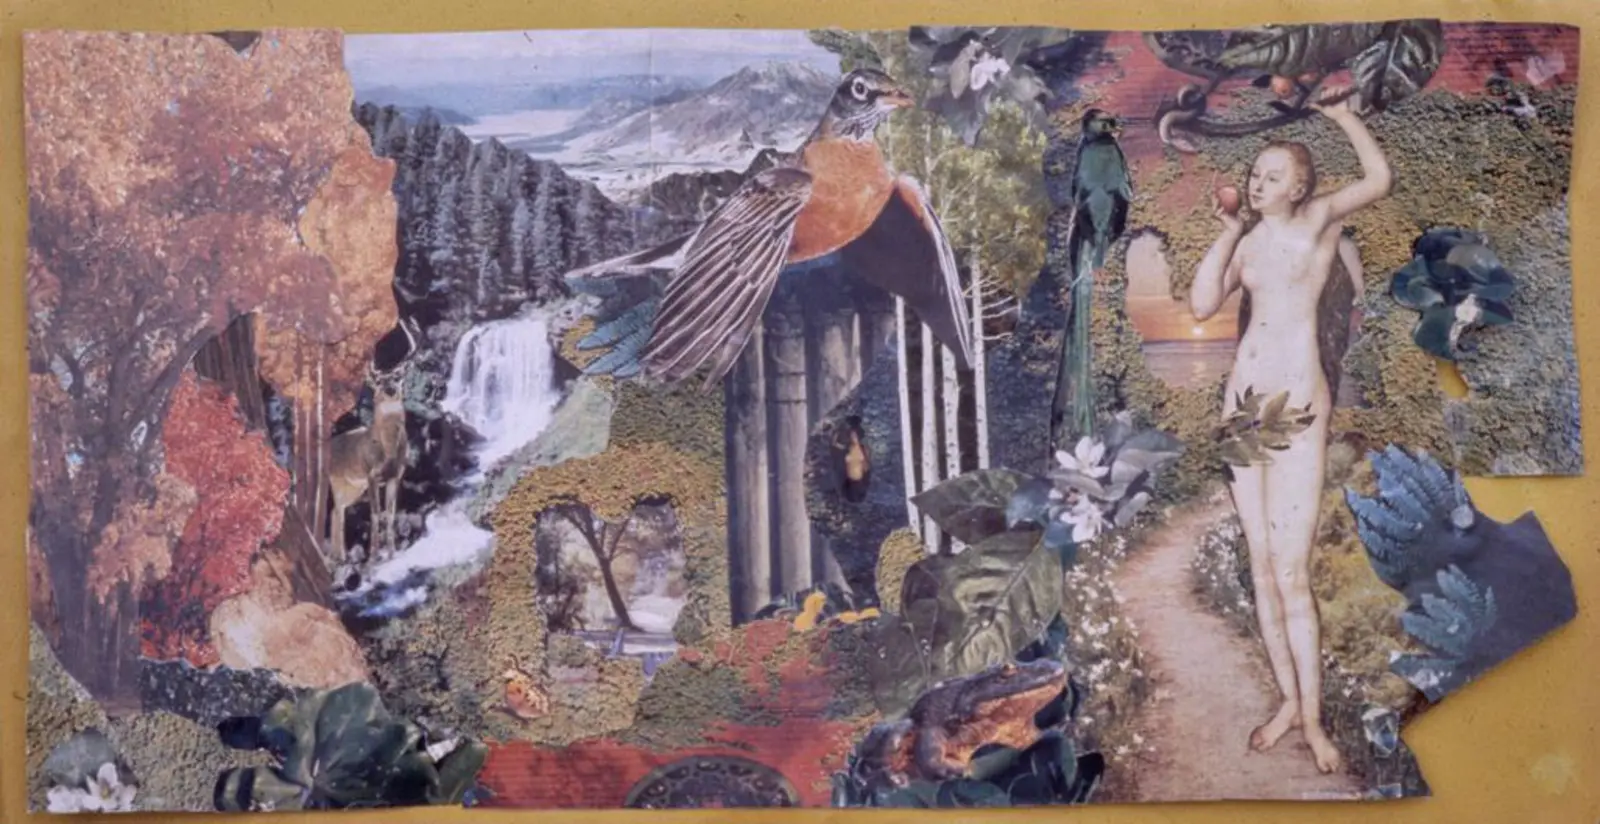 A collaged landscape with trees, waterfalls, and Eve from the Bible.